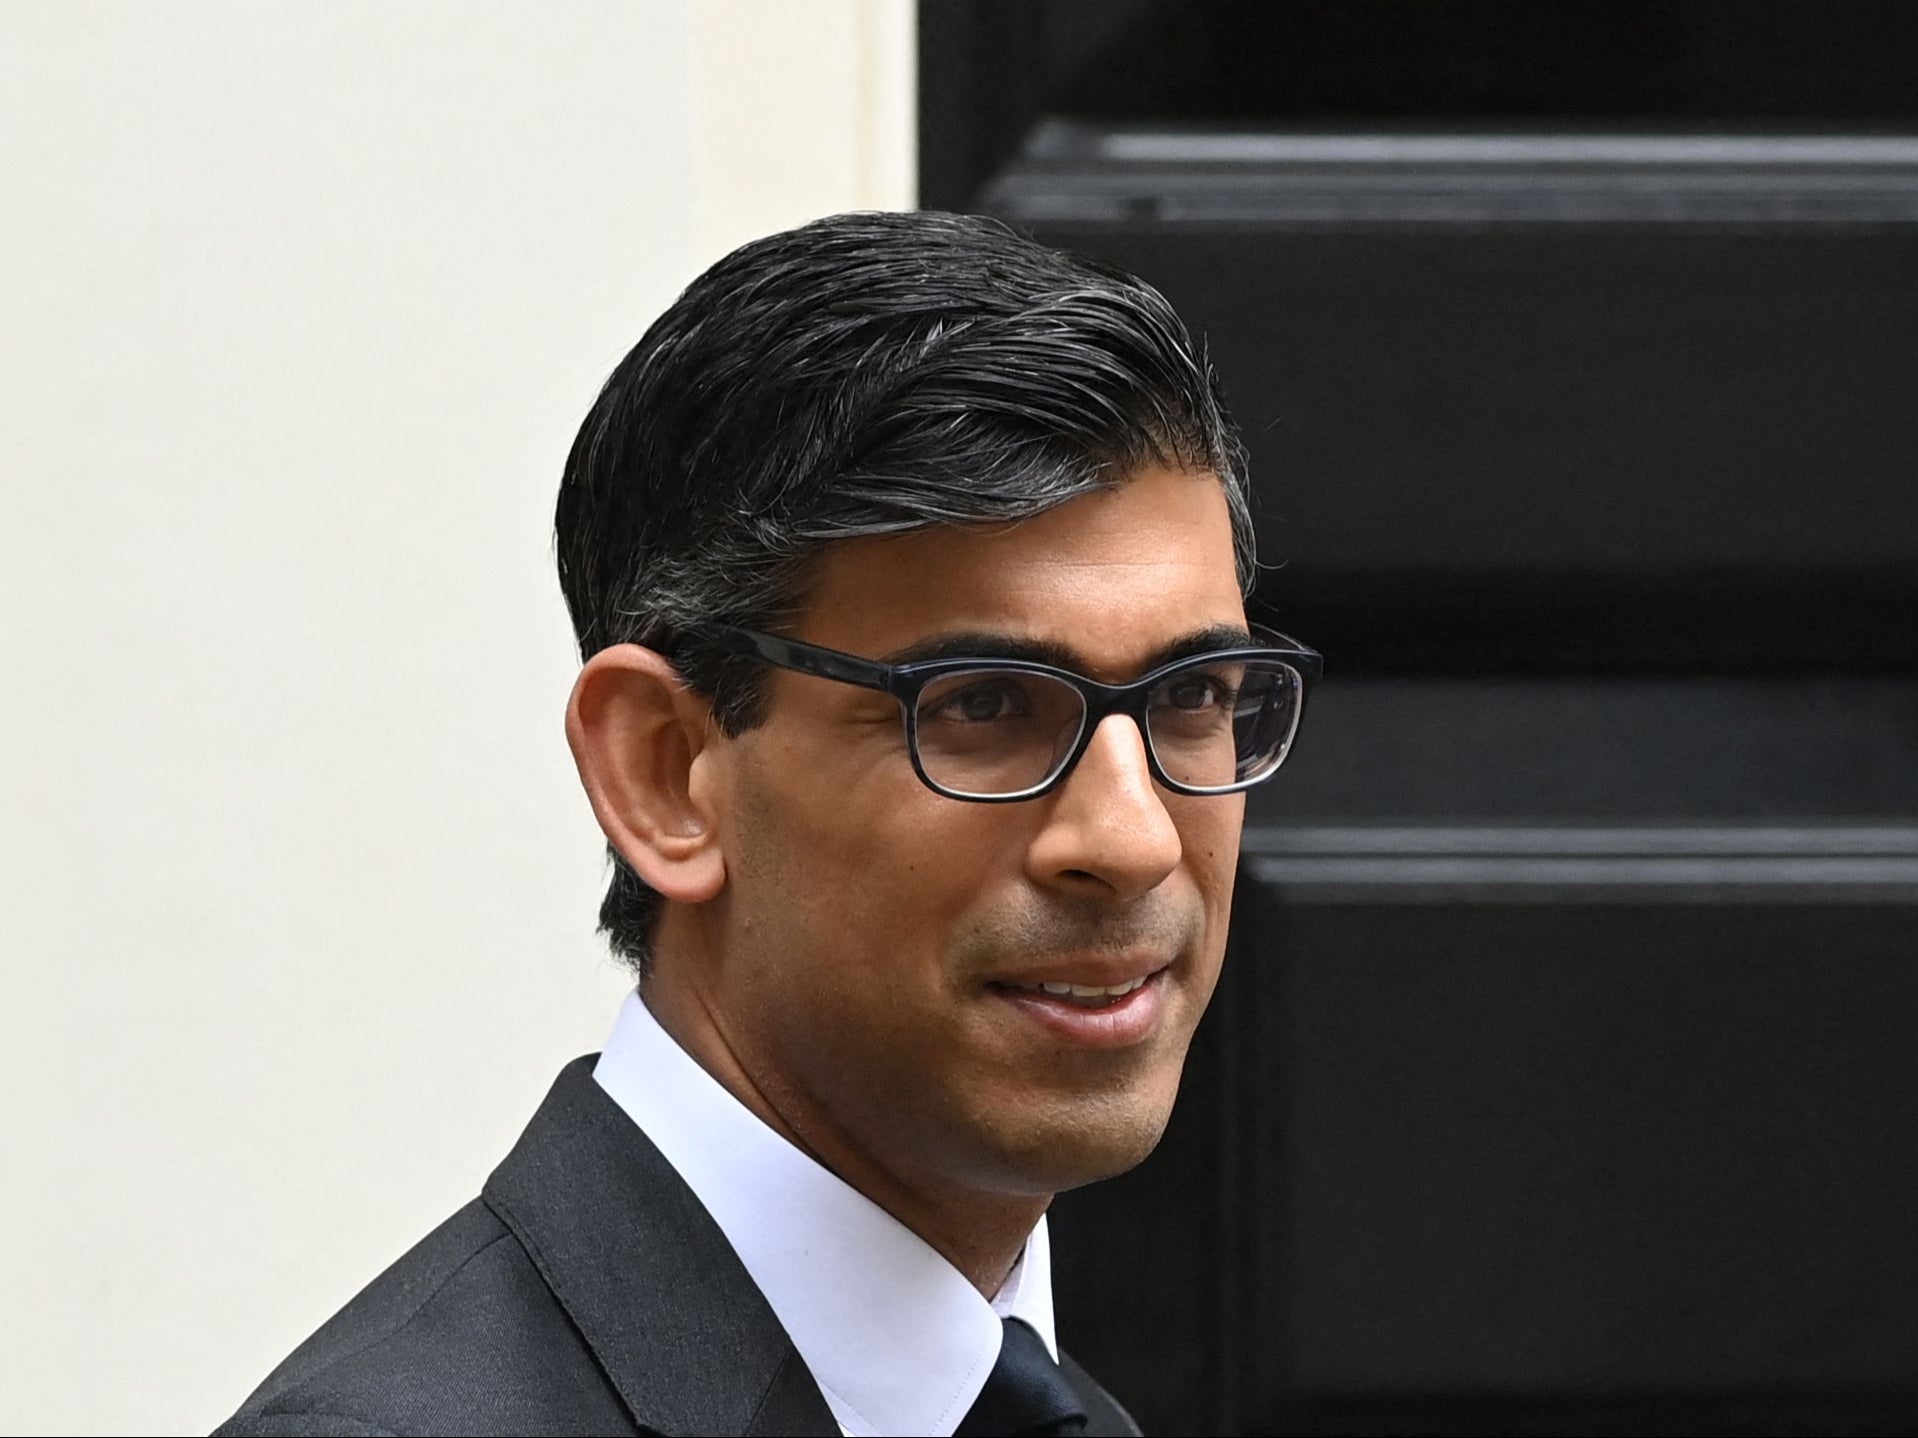 Rishi Sunak purchased the property with his wife Akshata Murthy for £1.5m in 2015